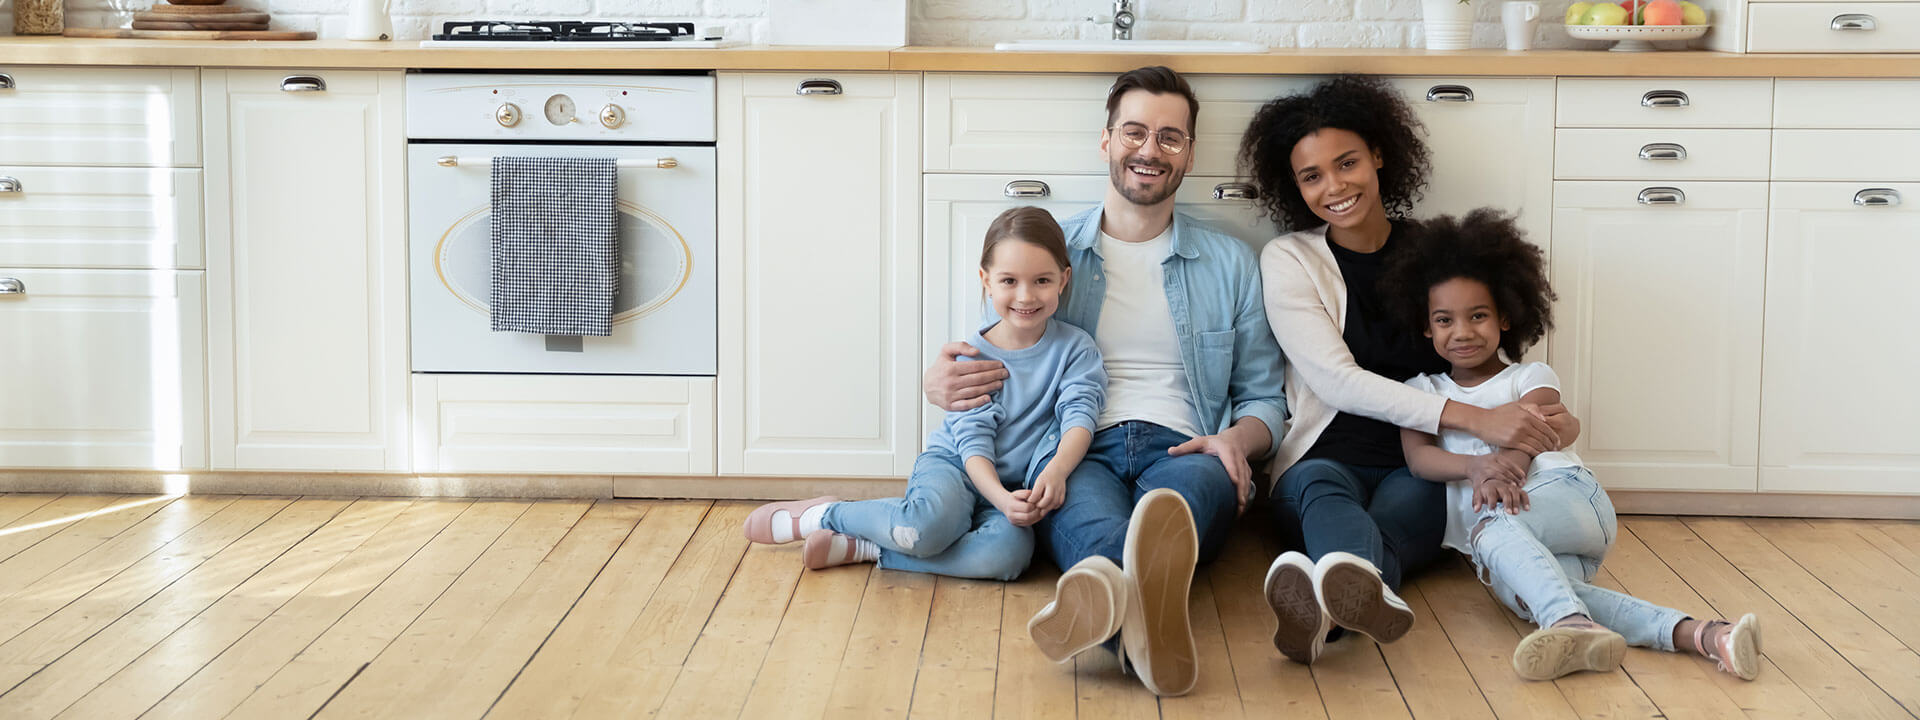 Happy young family with little kids sit on warm floor in their remodeled kitchen.